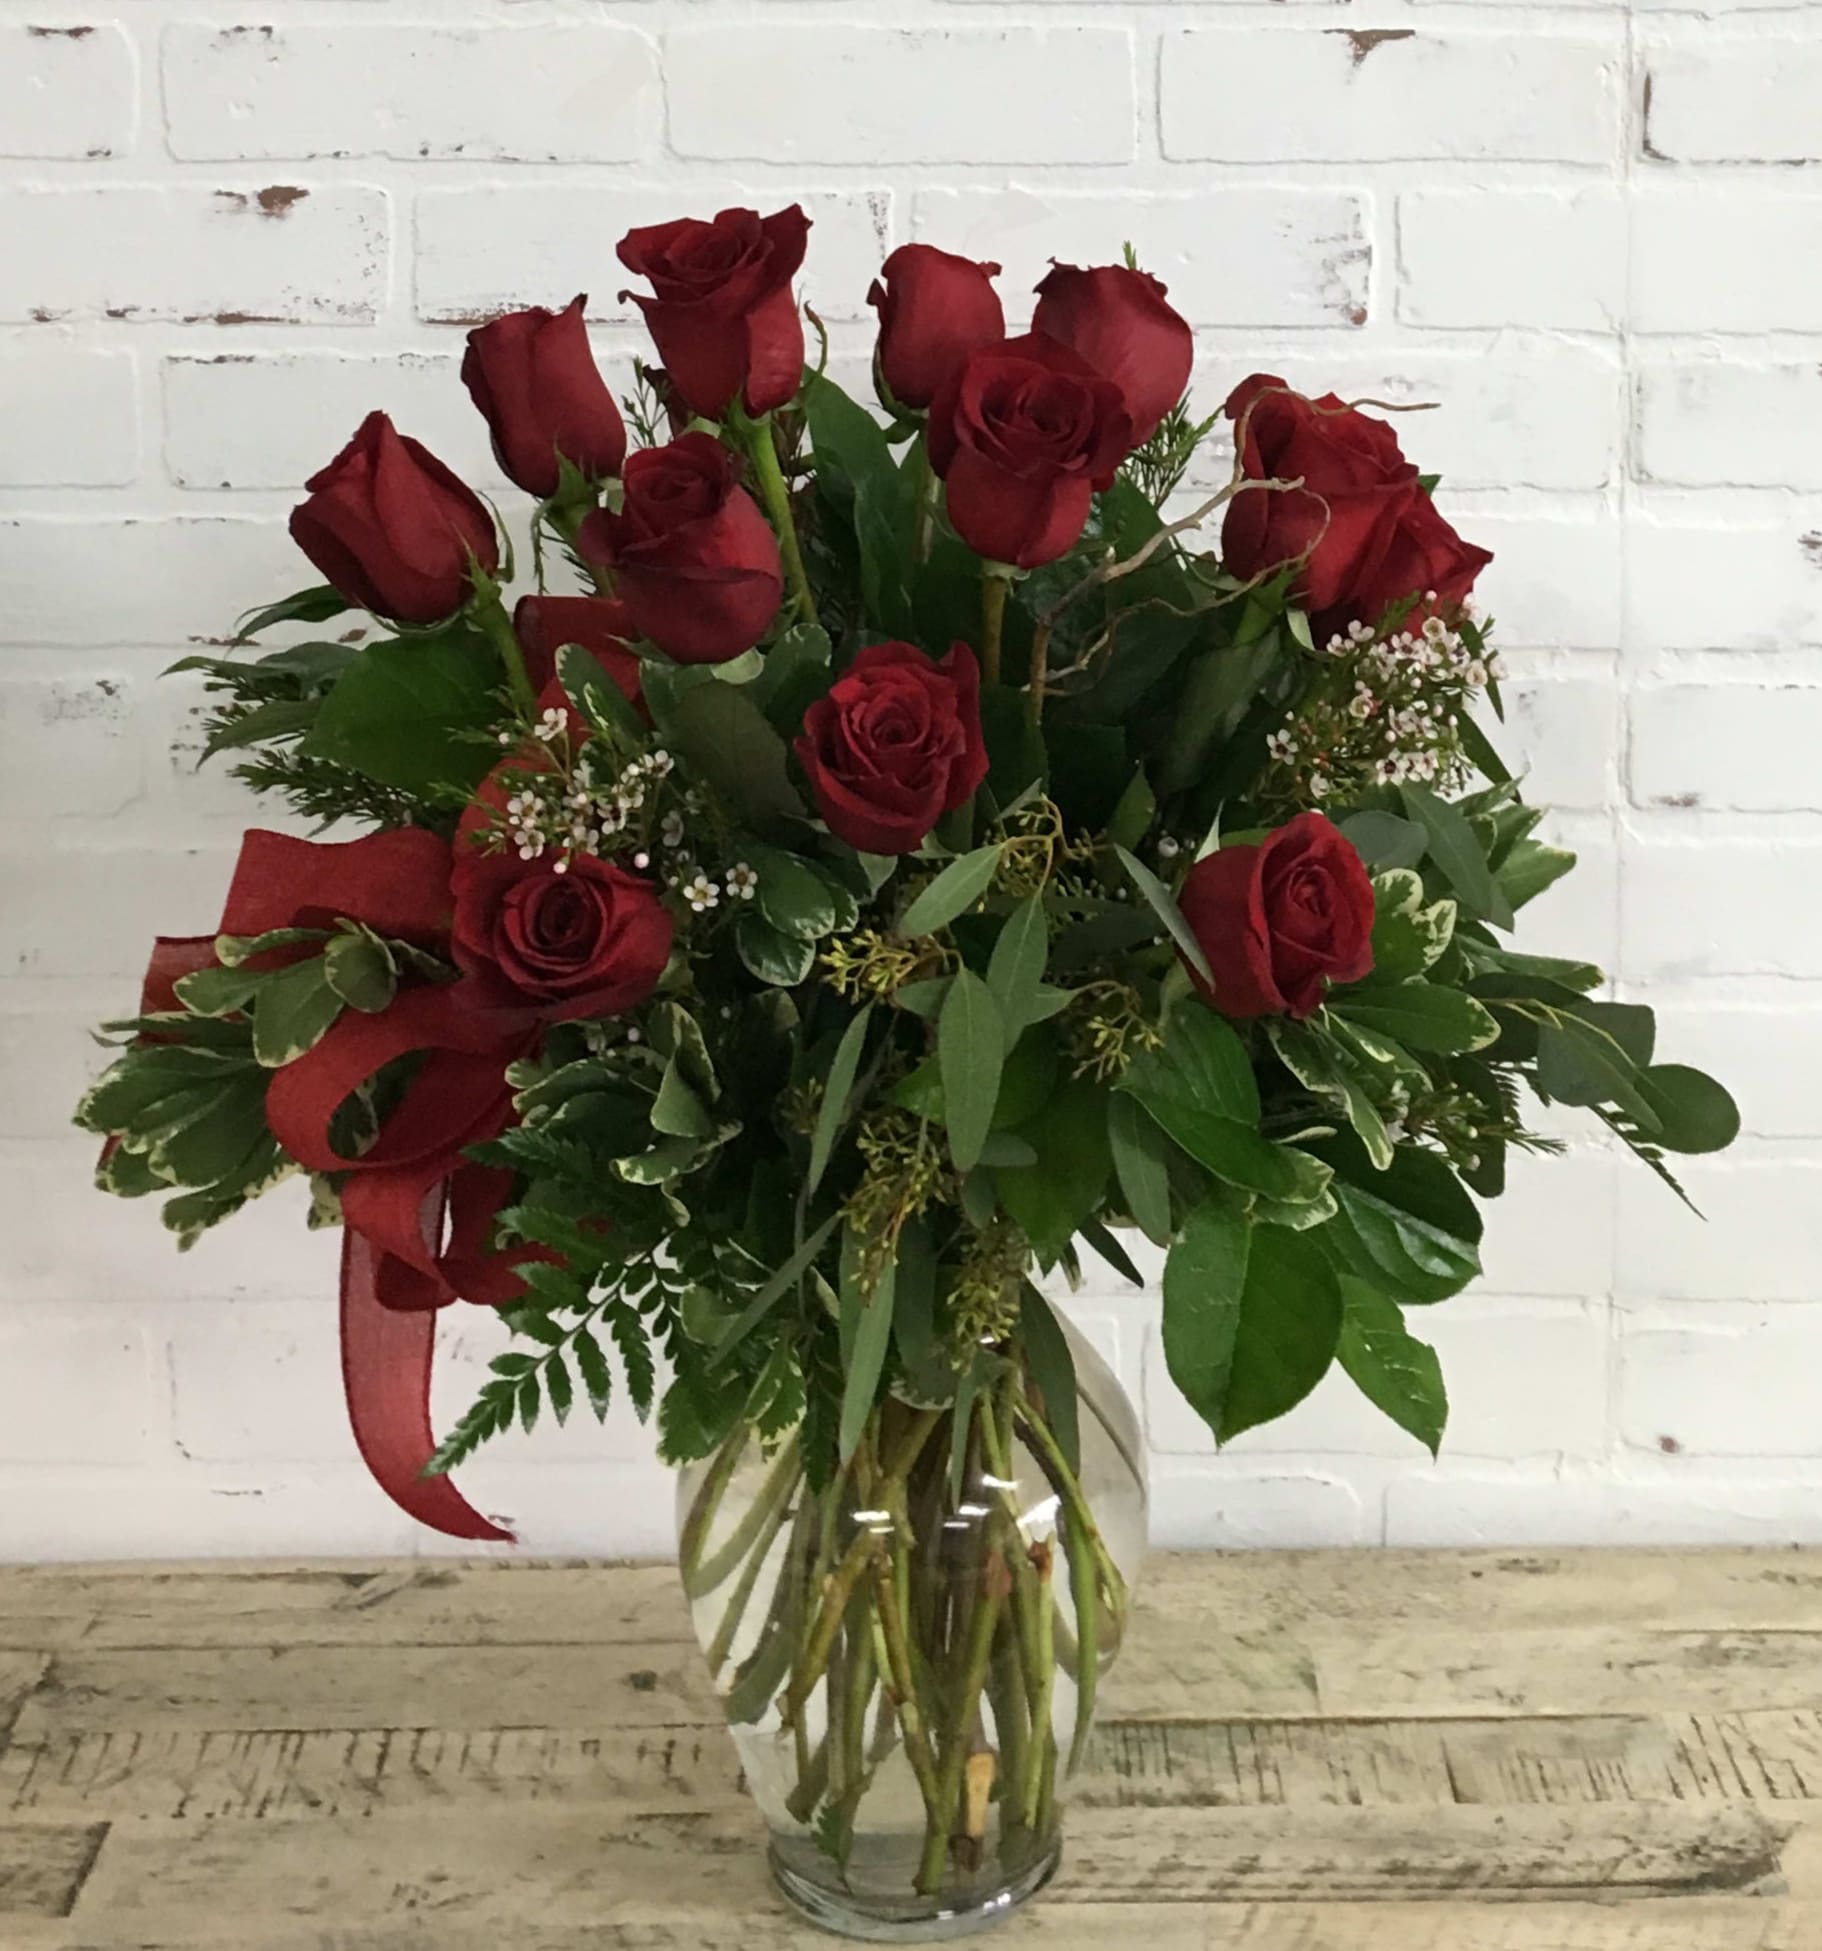 Dozen Roses - 12 roses arranged in glass vase comes in red, yellow, pink, or white. Please specify color when ordering. (Some colors may not be available at time of purchase)